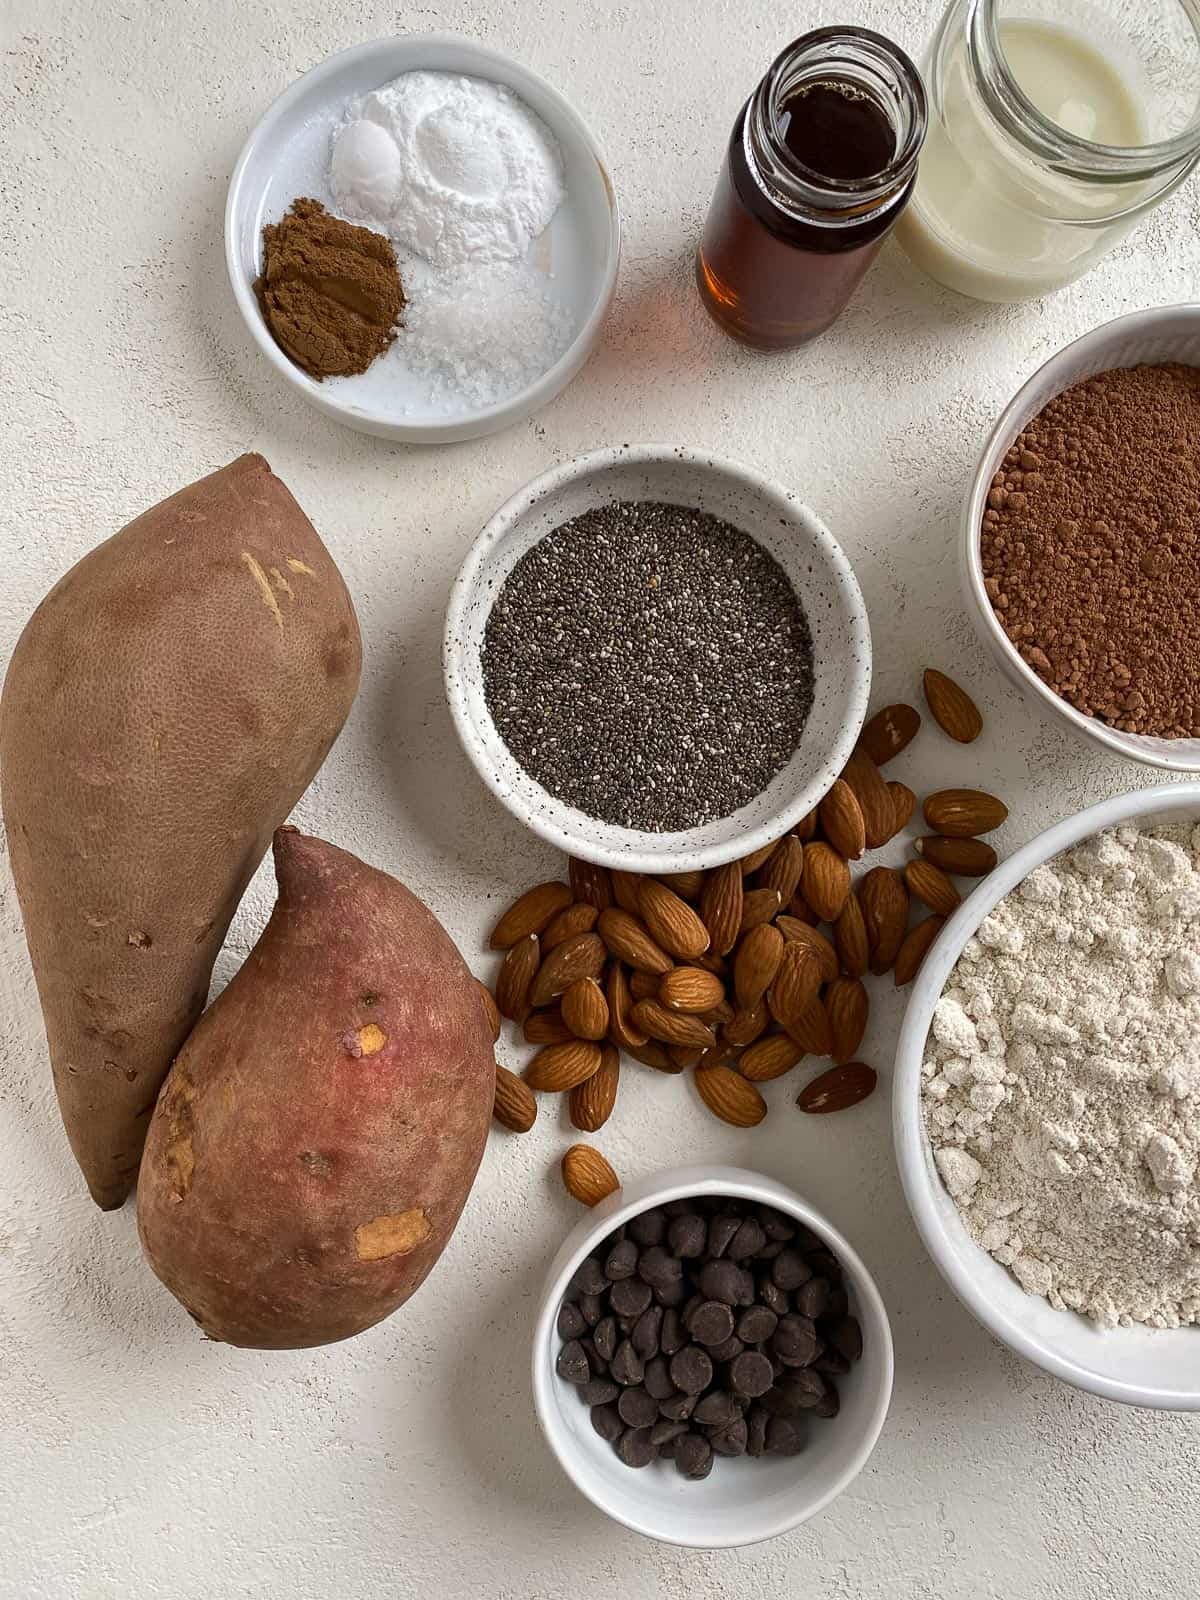 ingredients for Sweet Potato Chocolate Cake measured out against a white surface